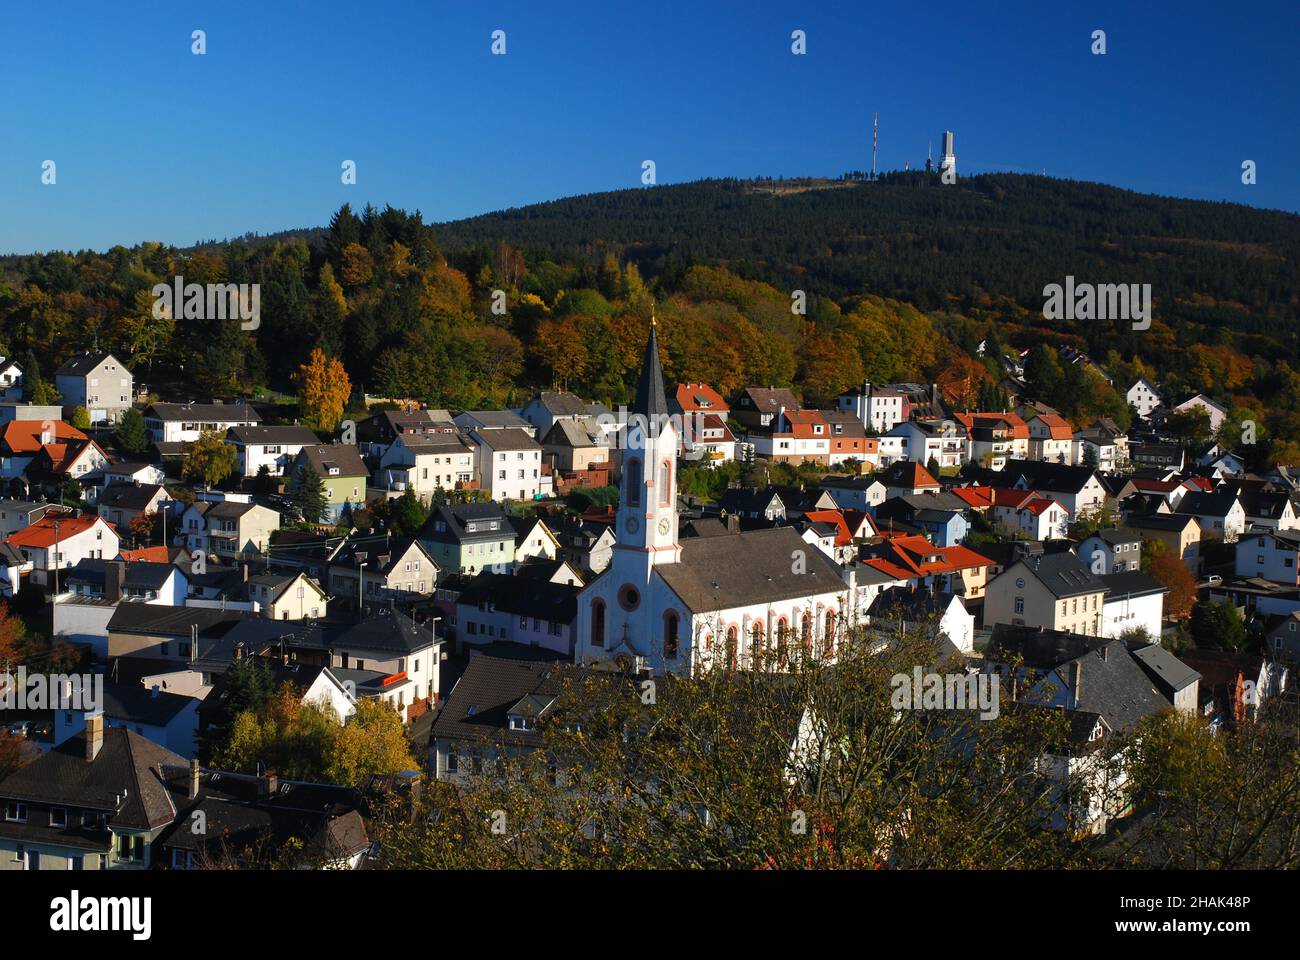 View From Fort Reifenberg To Schmitten Oberreifenberg And The Feldberg Mountain In Taunus Mountains Hesse Germany On A Beautiful Autumn Day With A Cle Stock Photo